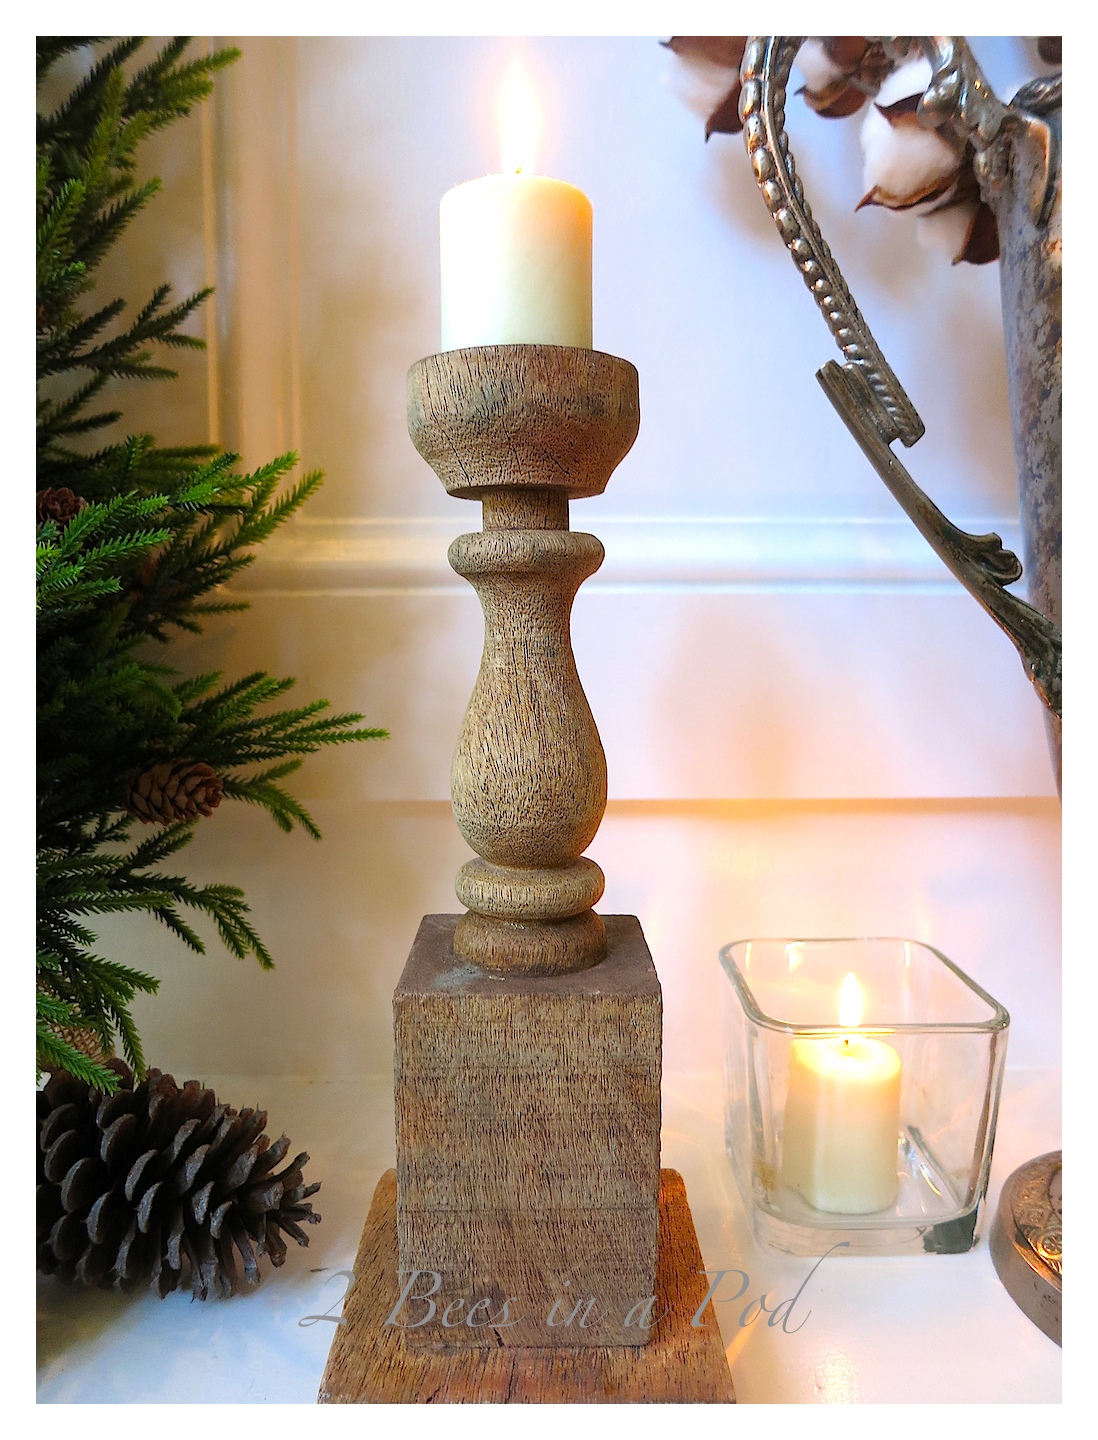 Winter Mantel Decor - natural elements of twigs,wood,  pinecones, cotton and feathers enhanced by candlelight and deer bust